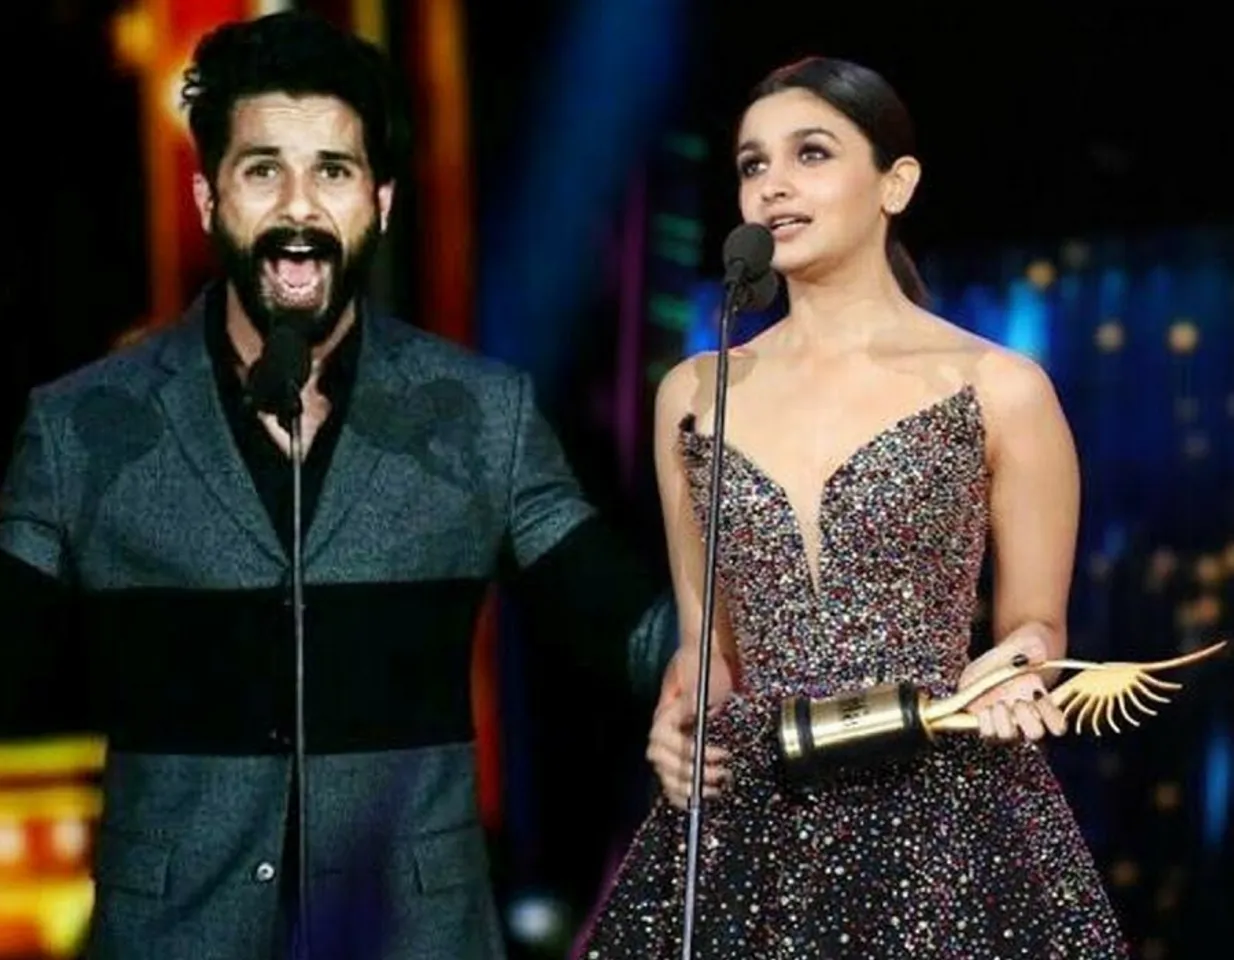 HERE'S THE COMPLETE LIST OF WINNERS AT IIFA 2017